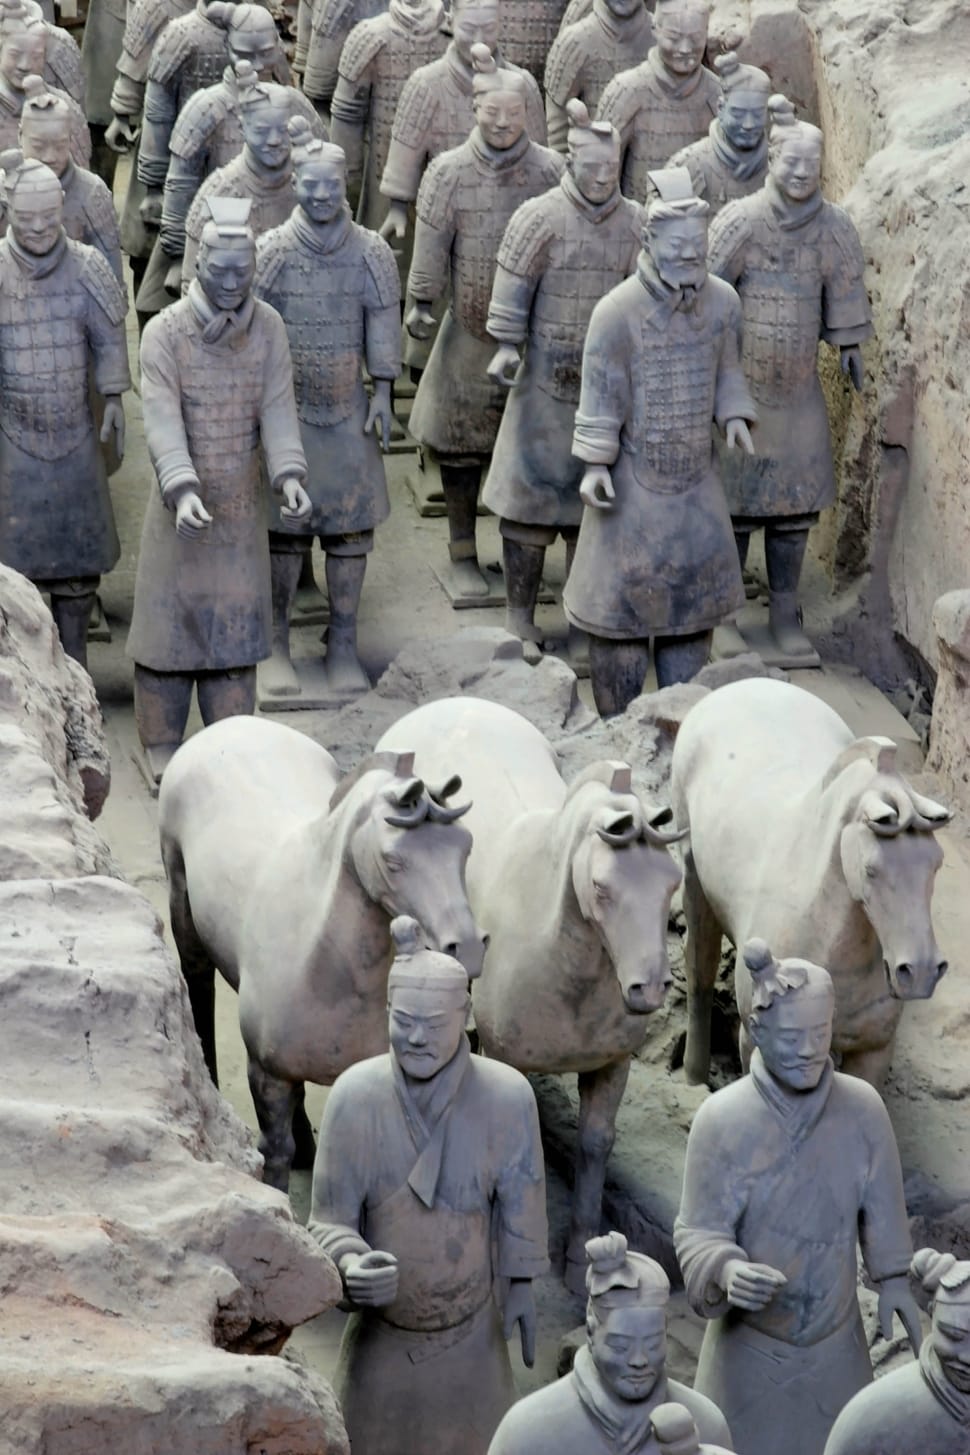 terracotta army statues free image